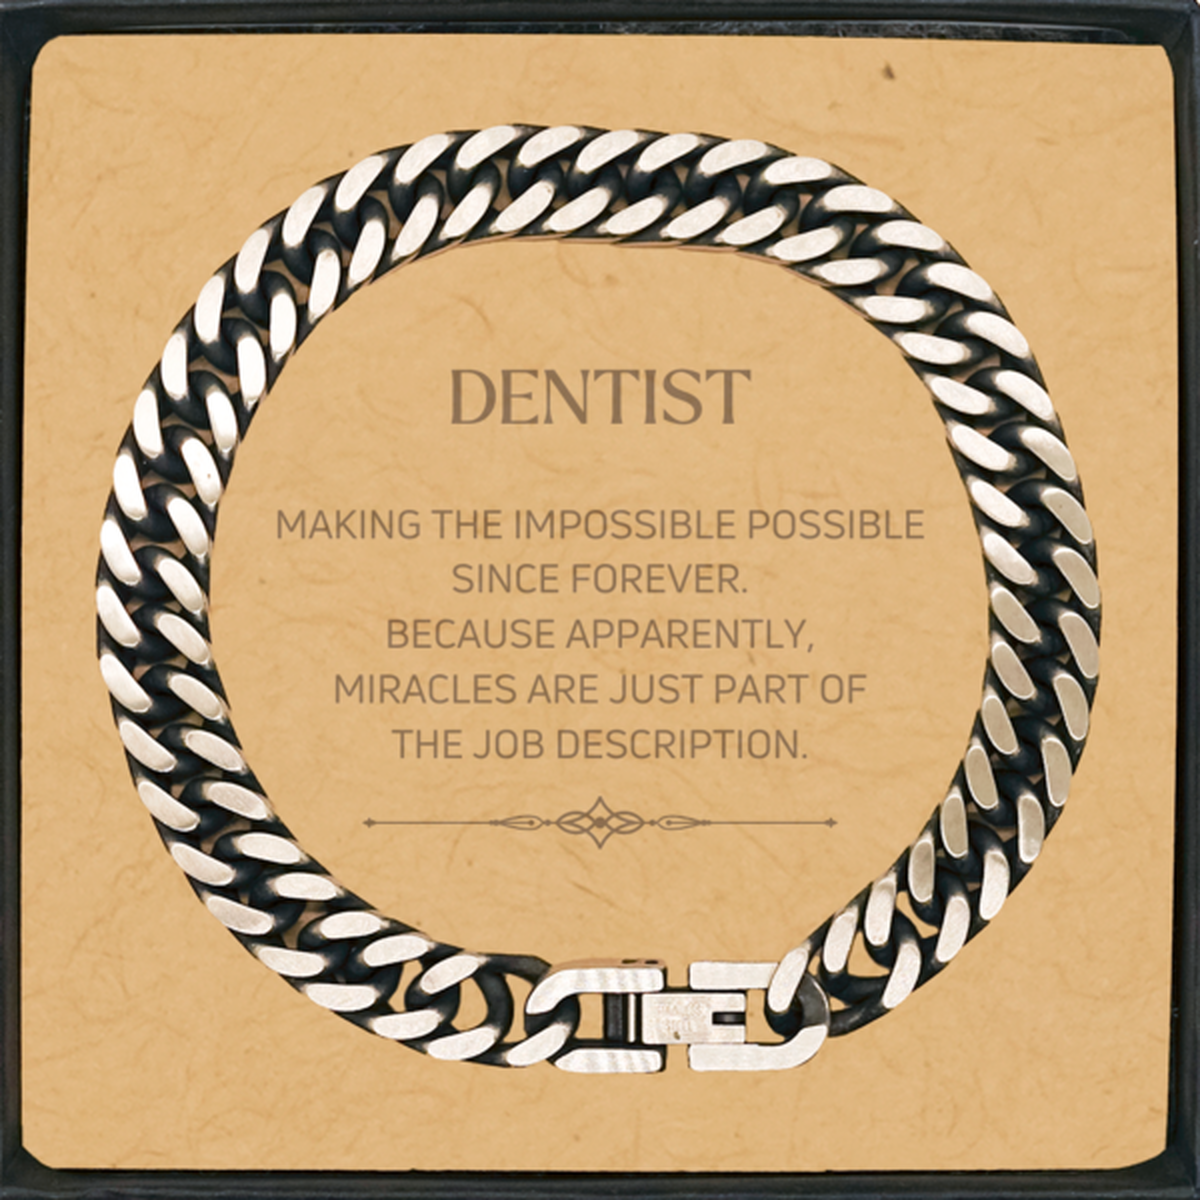 Funny Dentist Gifts, Miracles are just part of the job description, Inspirational Birthday Cuban Link Chain Bracelet For Dentist, Men, Women, Coworkers, Friends, Boss